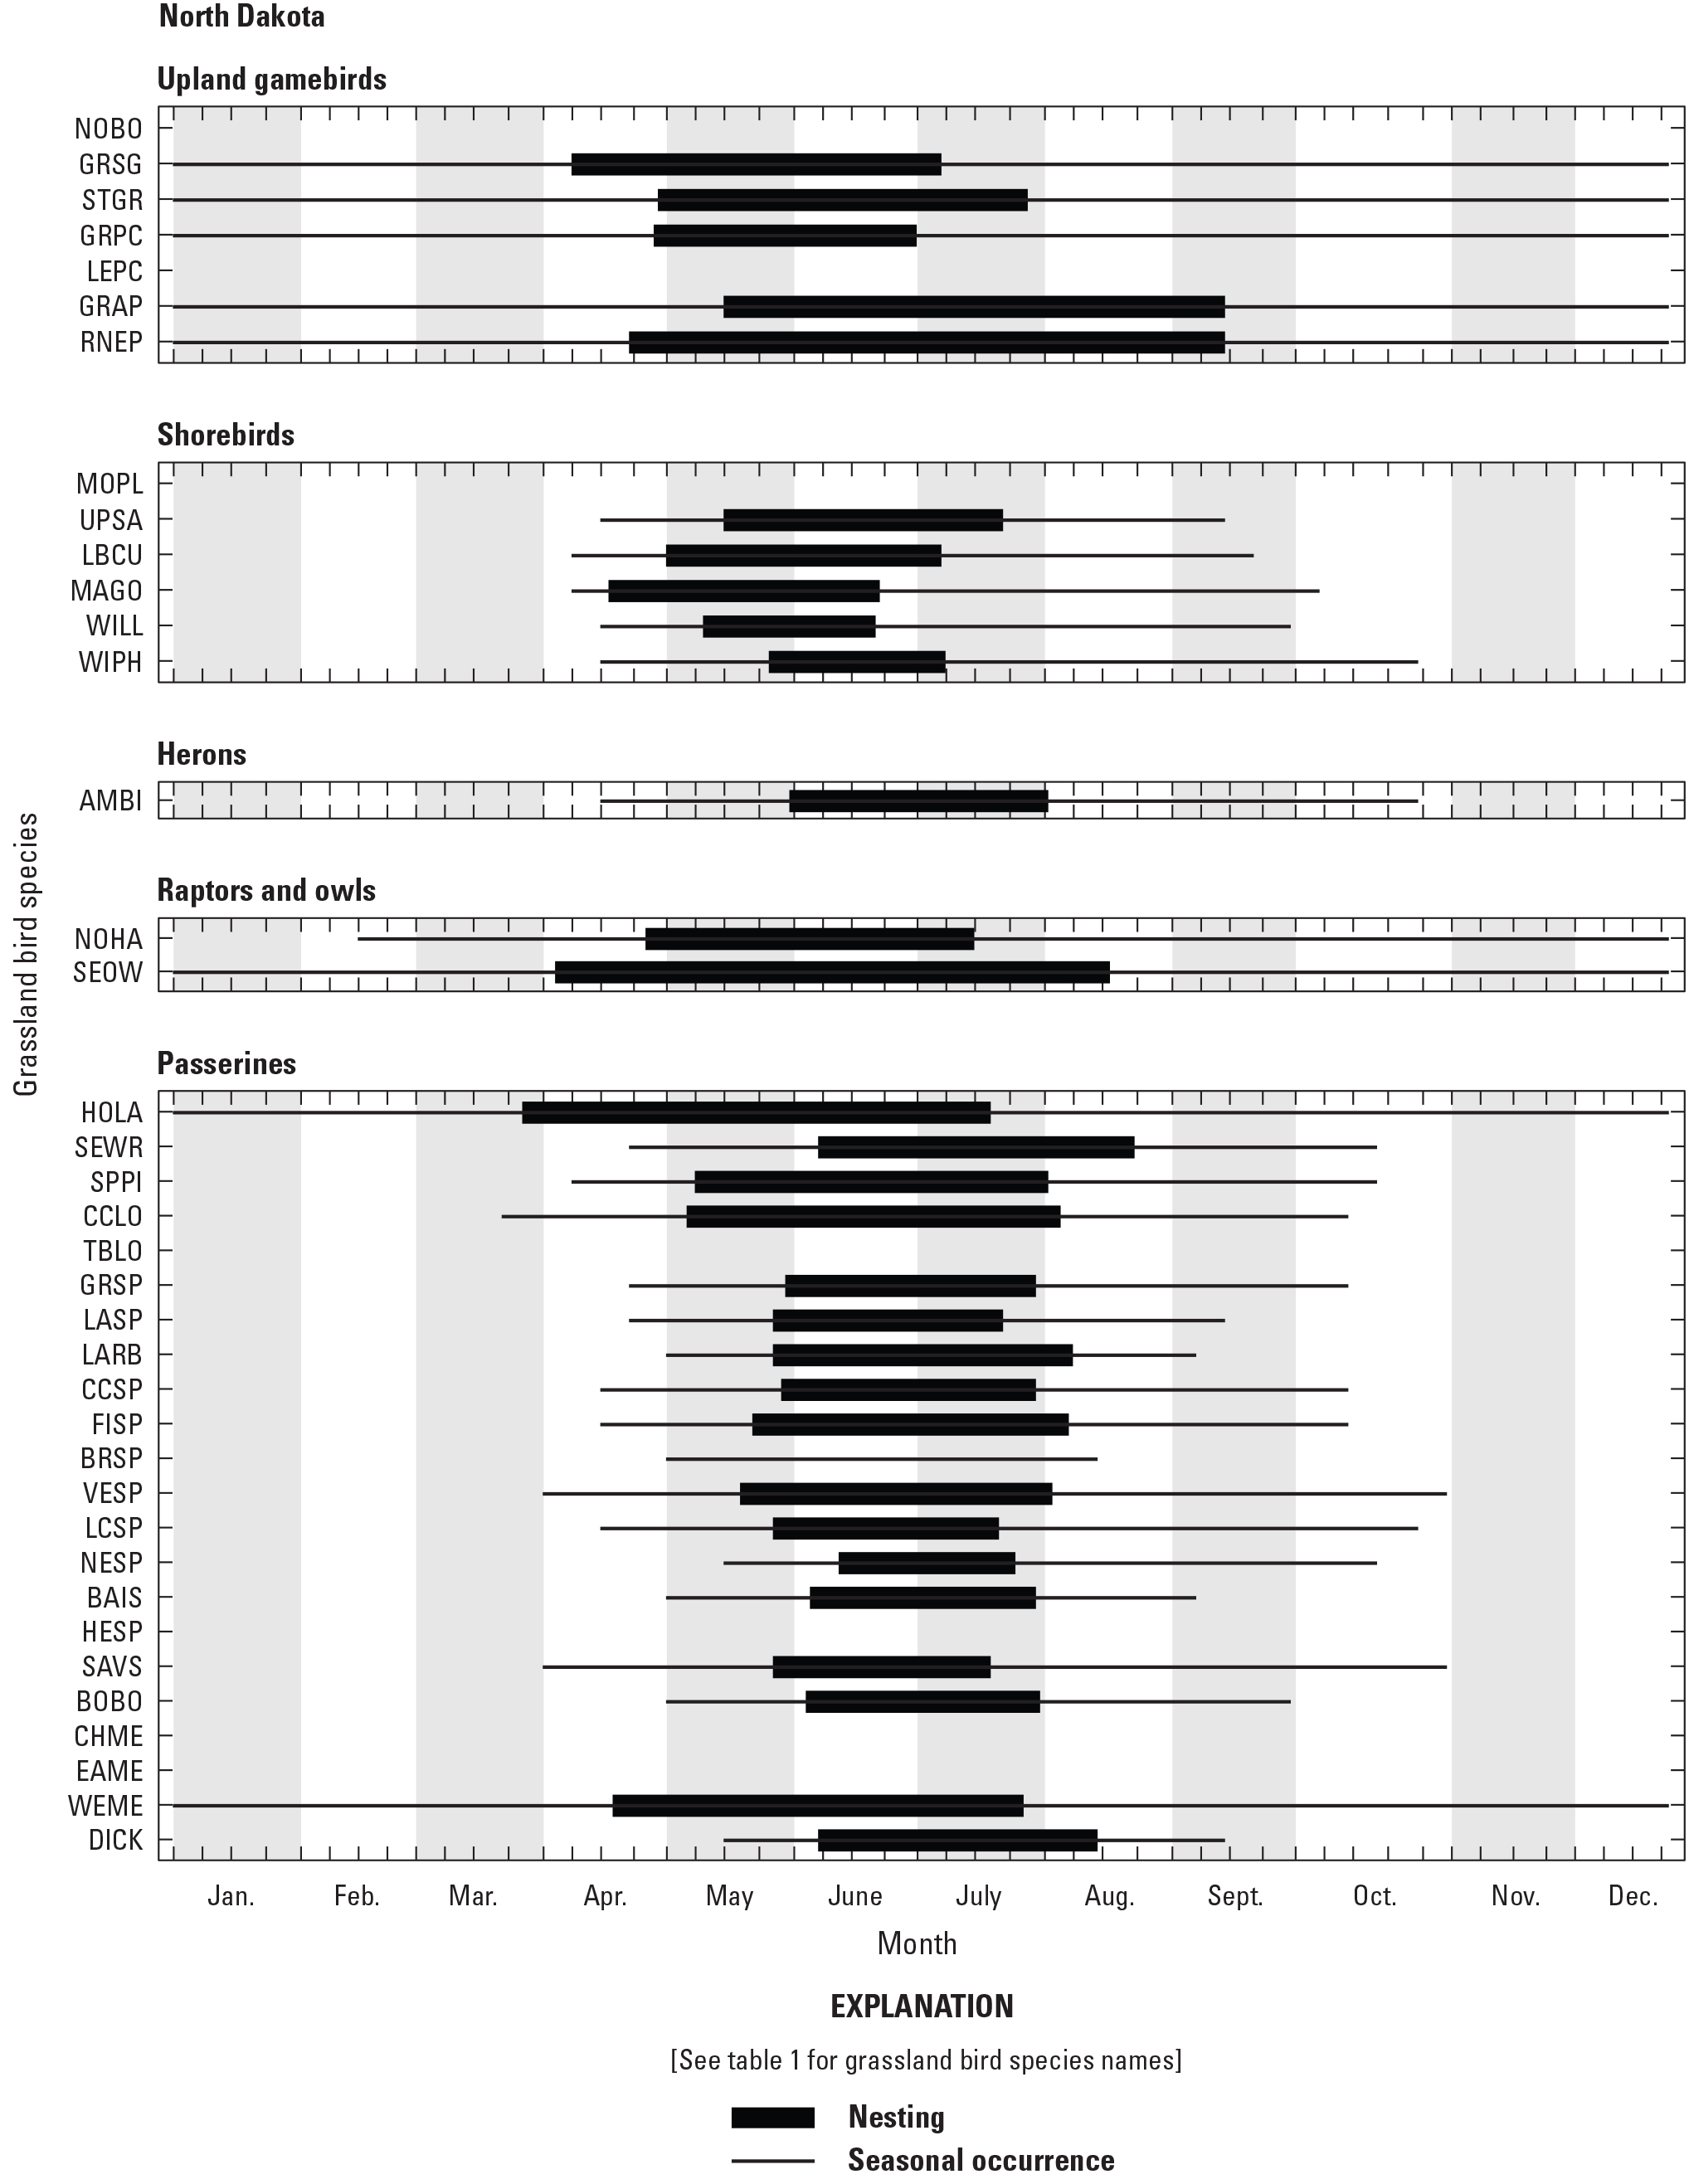 Figure showing seasonal occurrence and nesting phenology for 38 grassland bird species
               in North Dakota, United States.